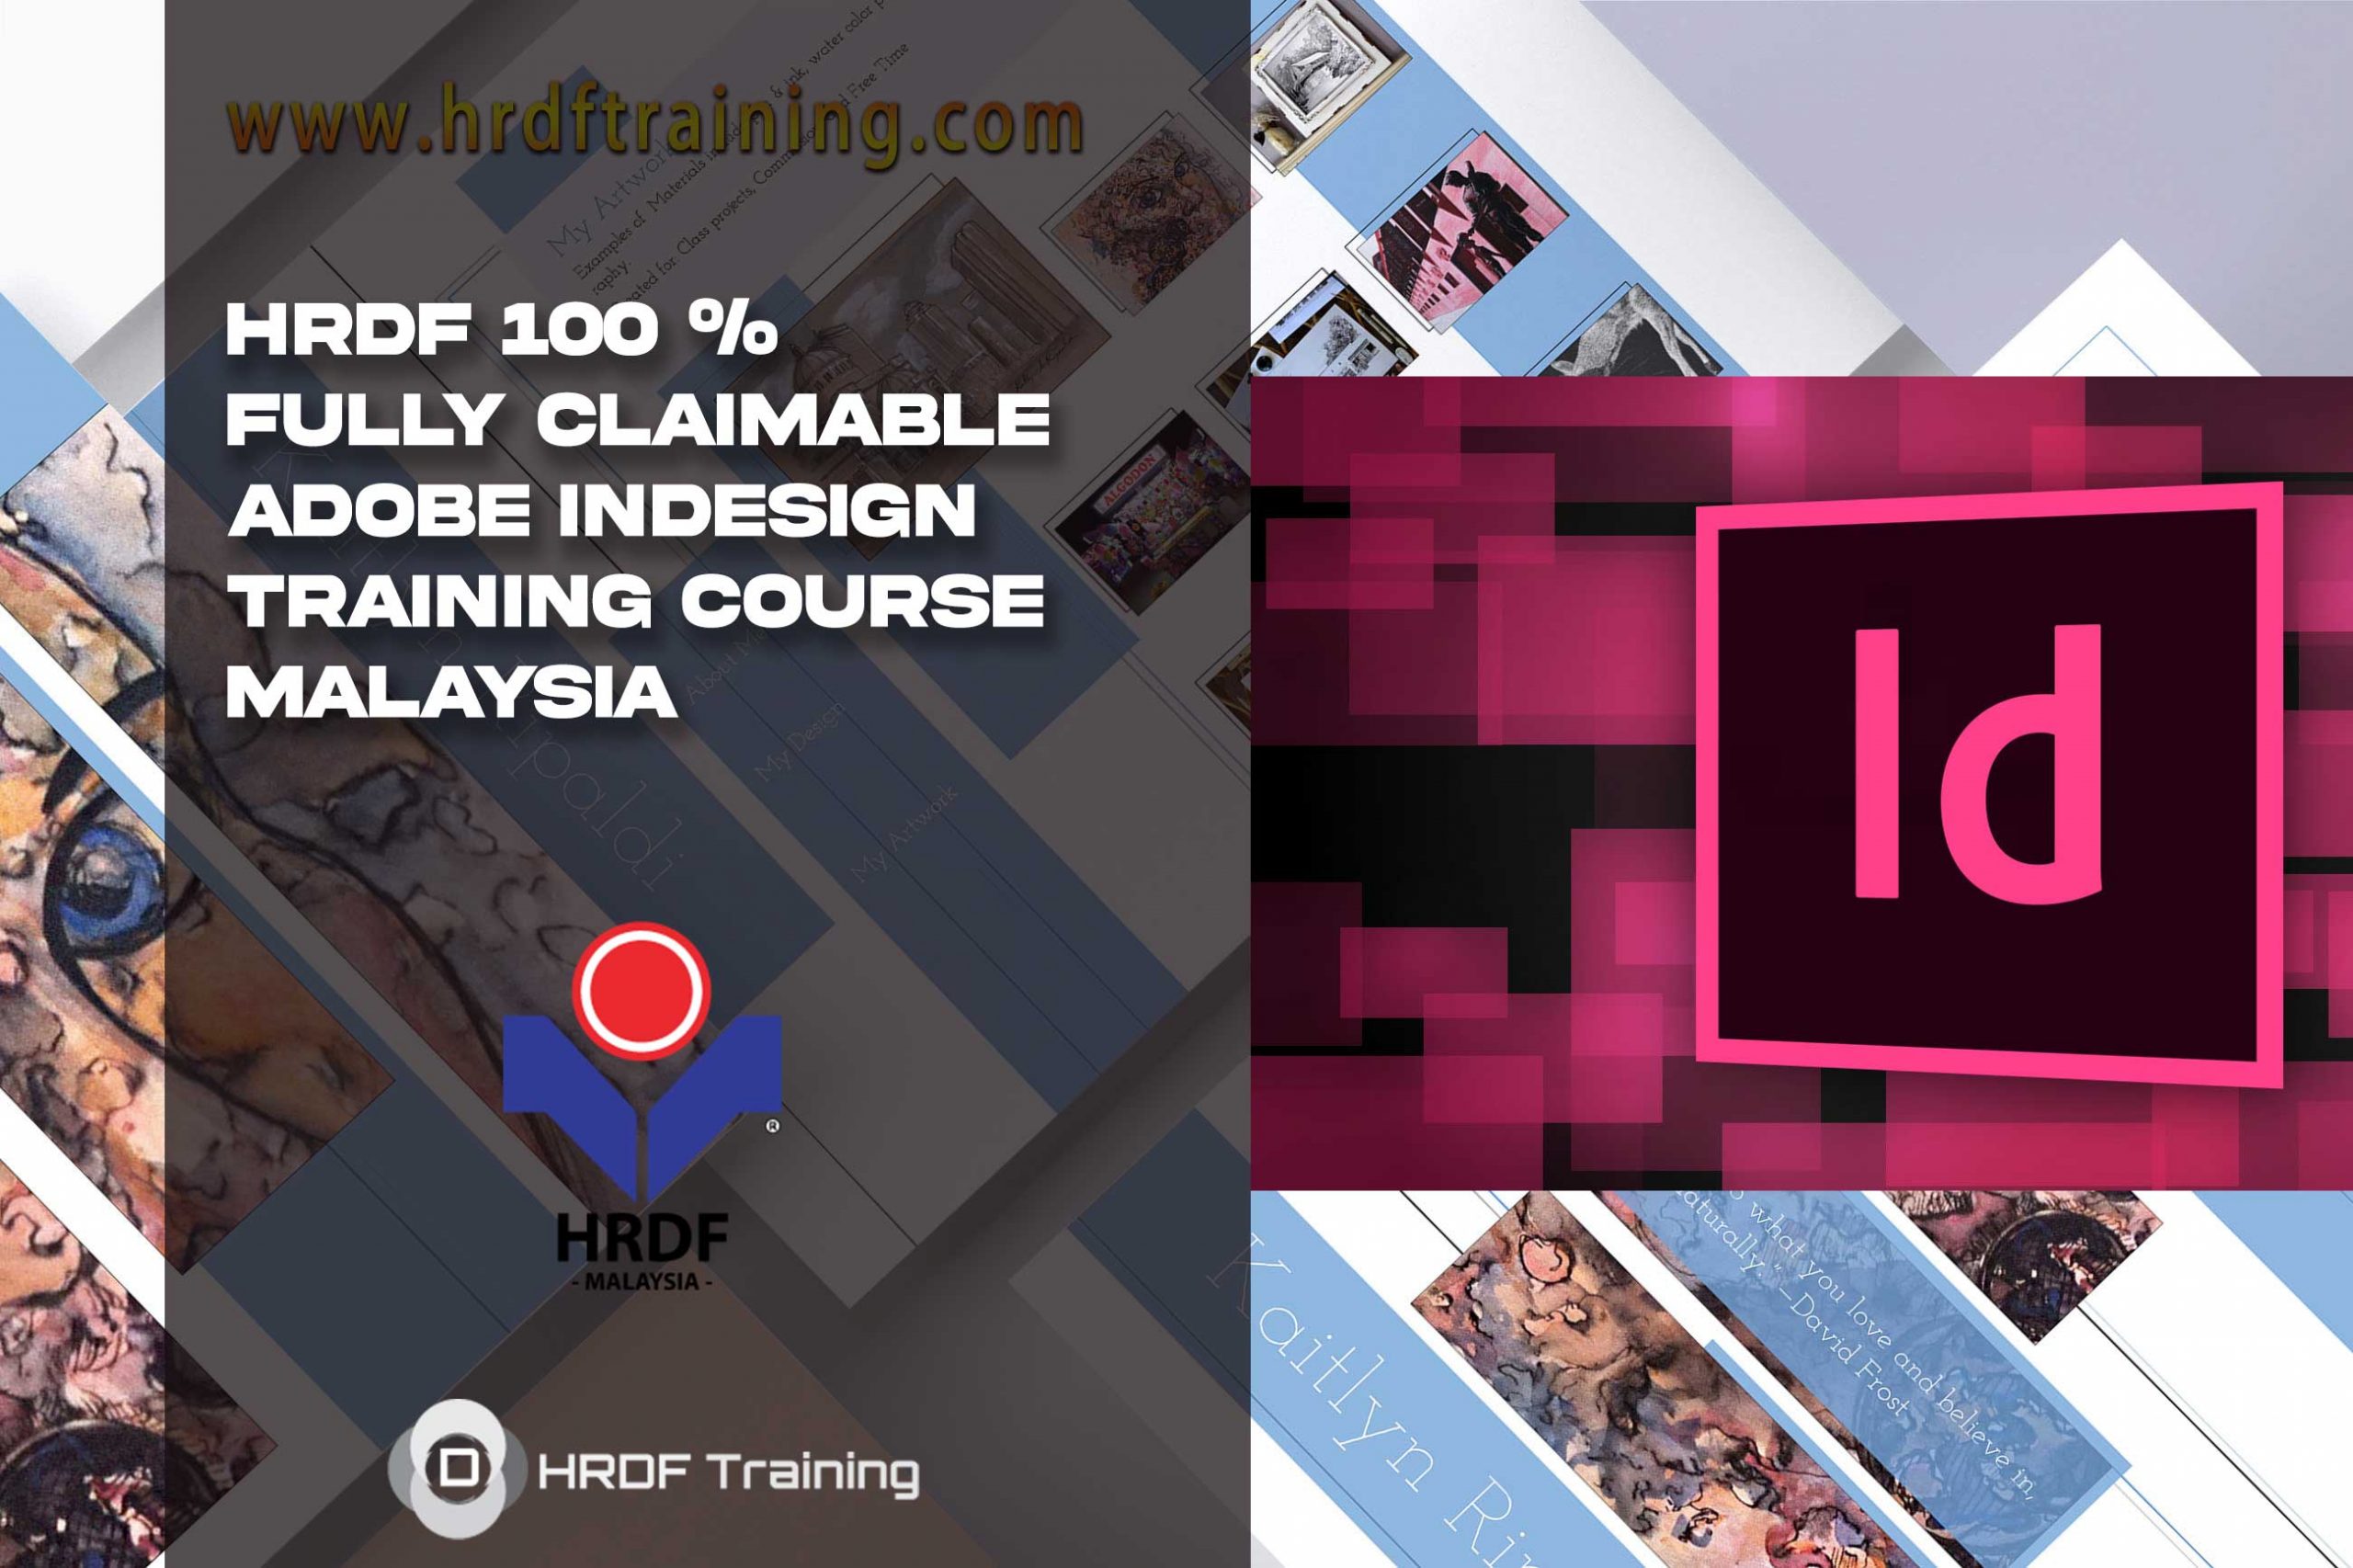 HRDF 100 % Fully Claimable ADOBE INDESIGN Training Course